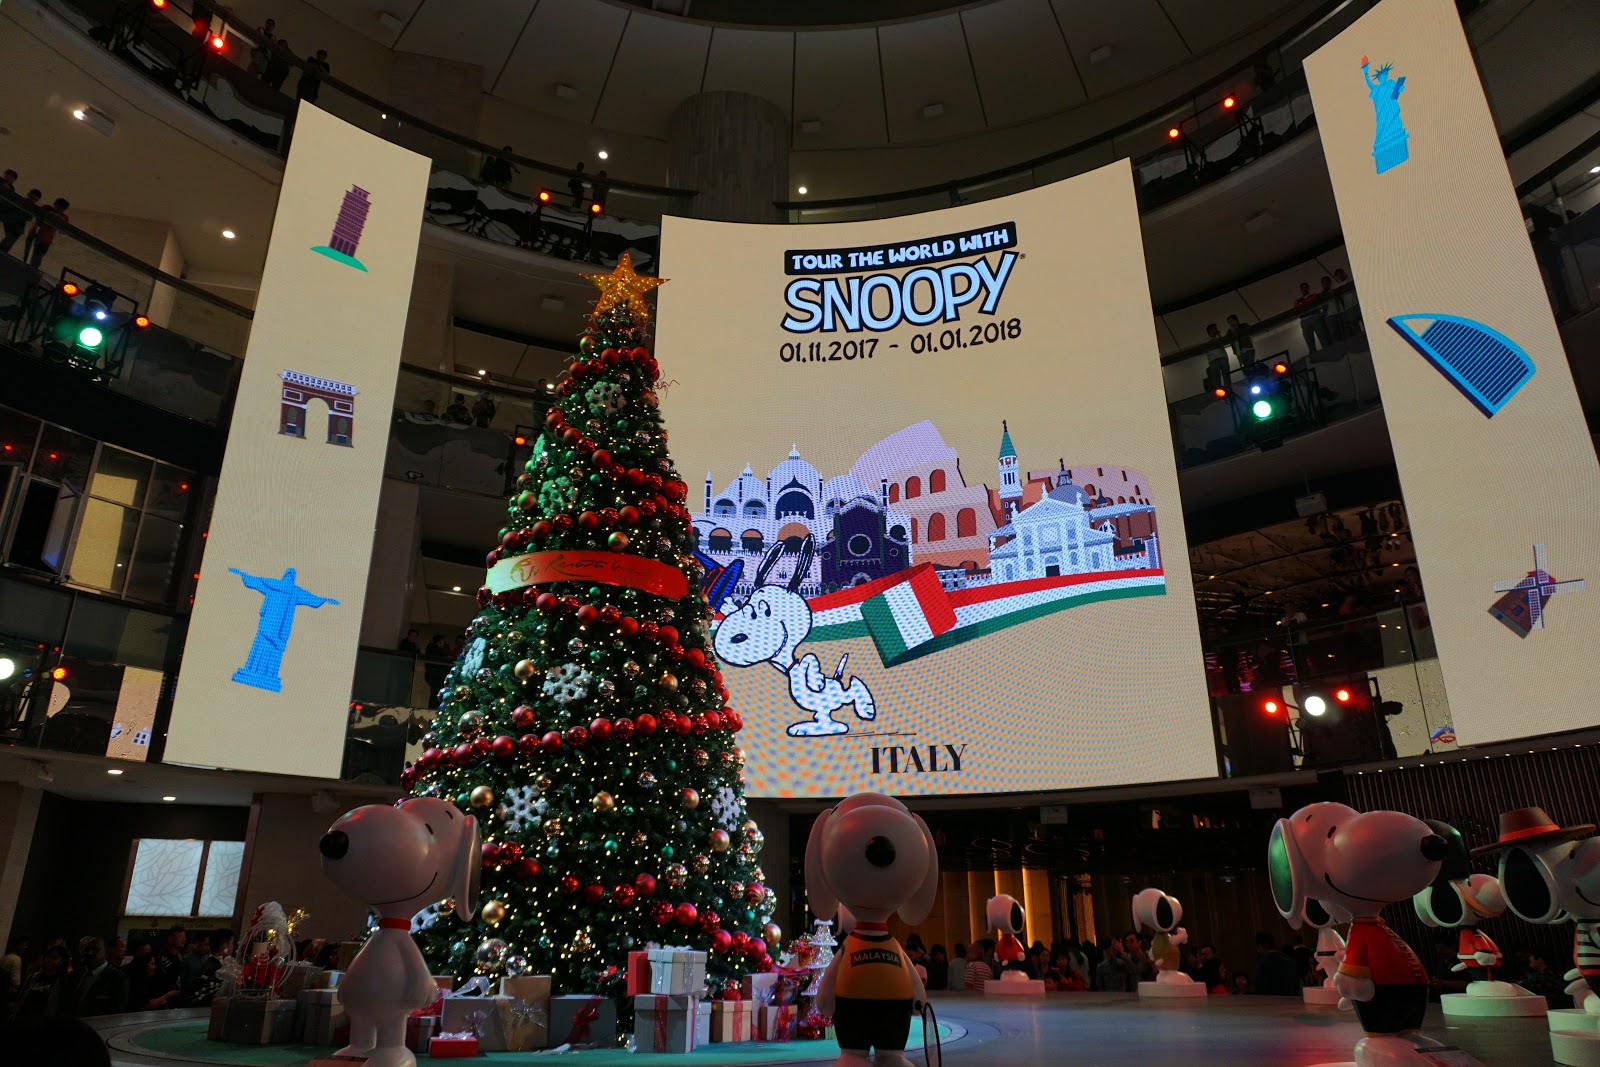 SKYMPHONY AND SNOOPY IN RESORTS WORLD GENTING